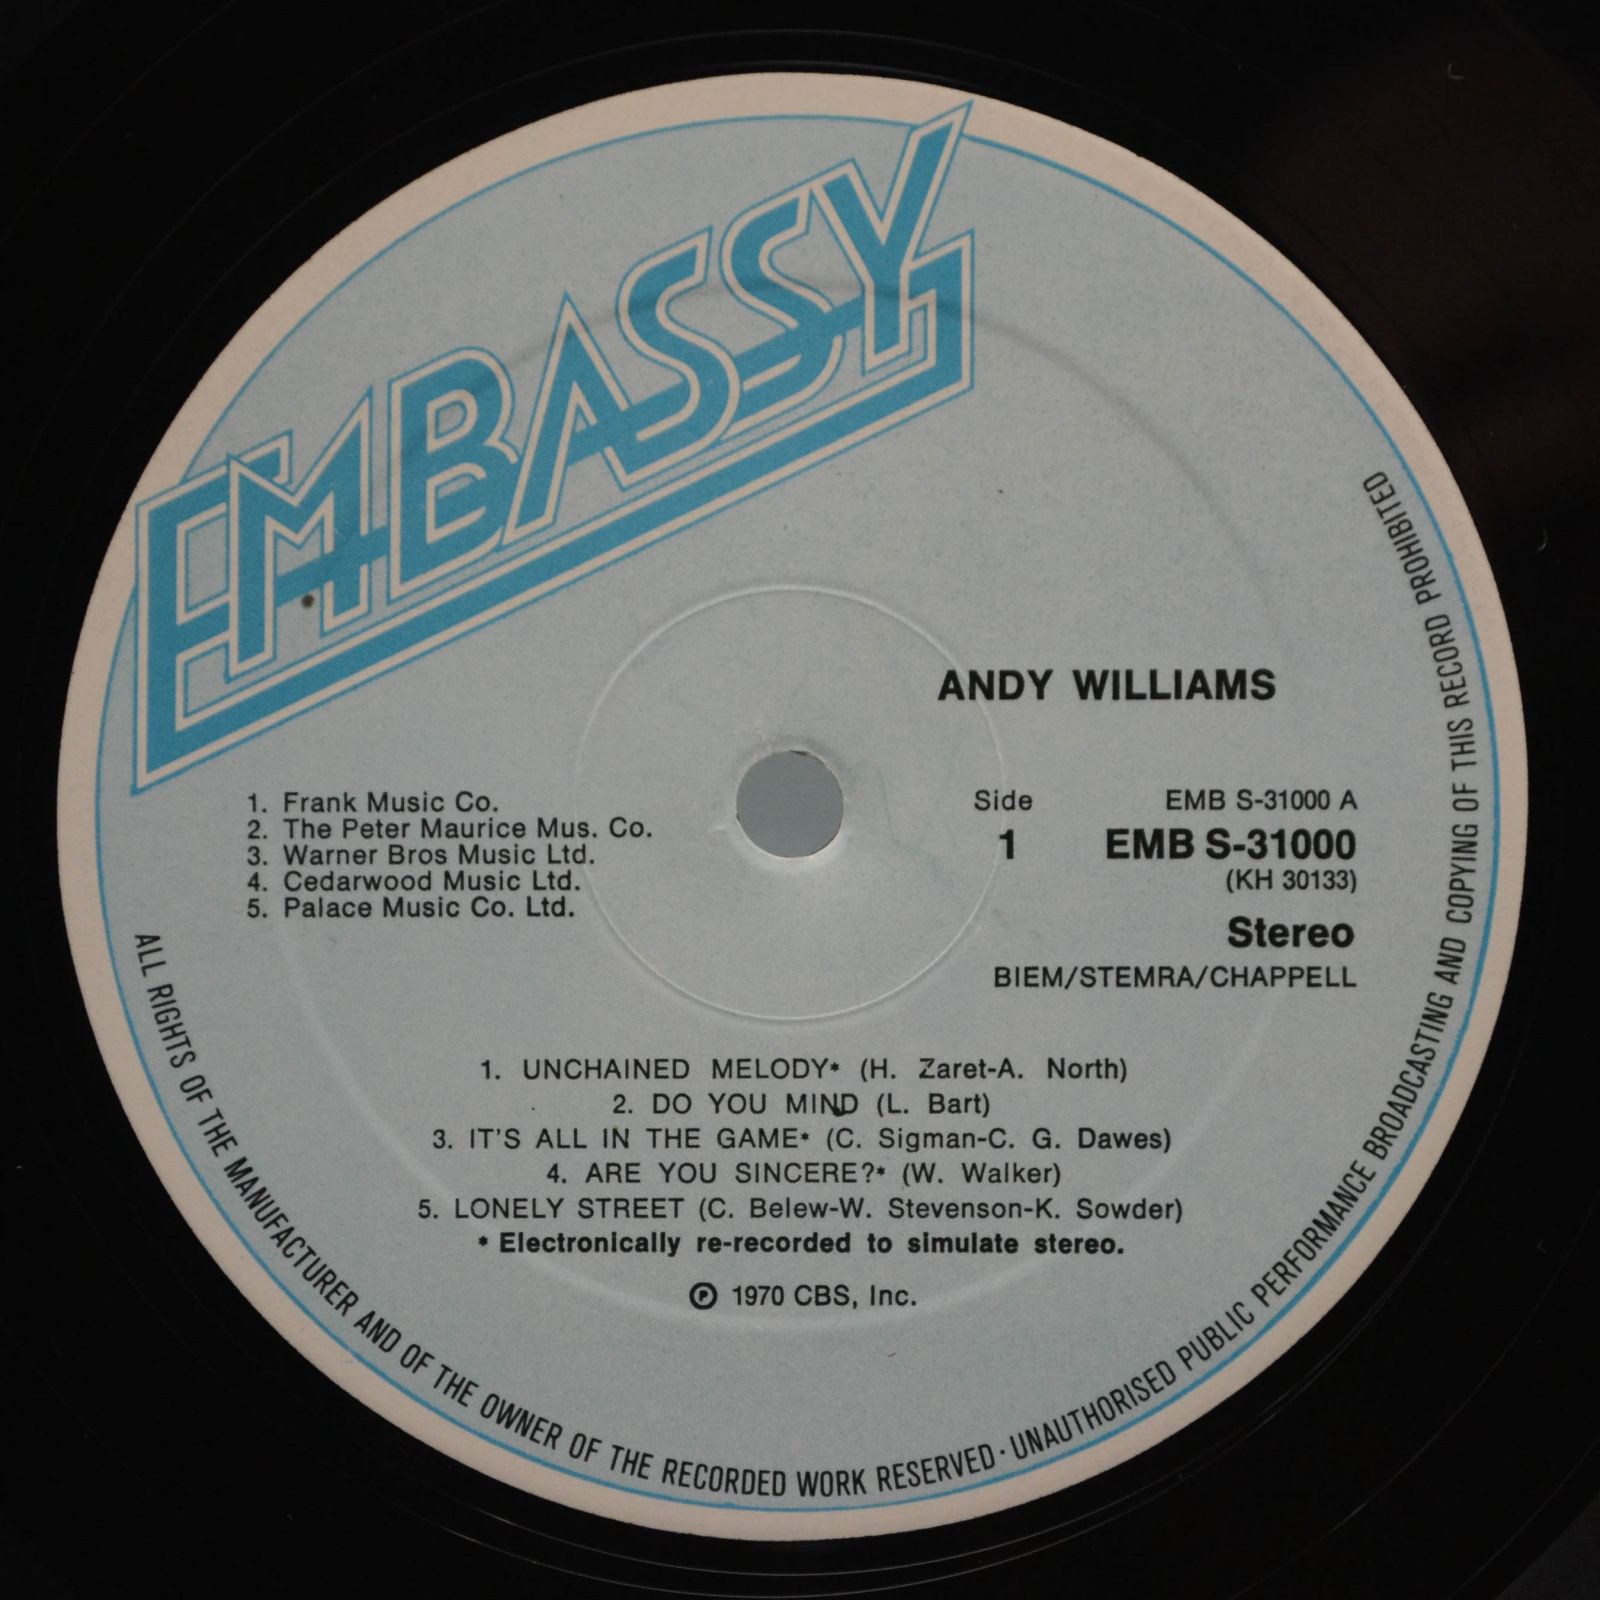 Andy Williams — Andy Williams, 1973